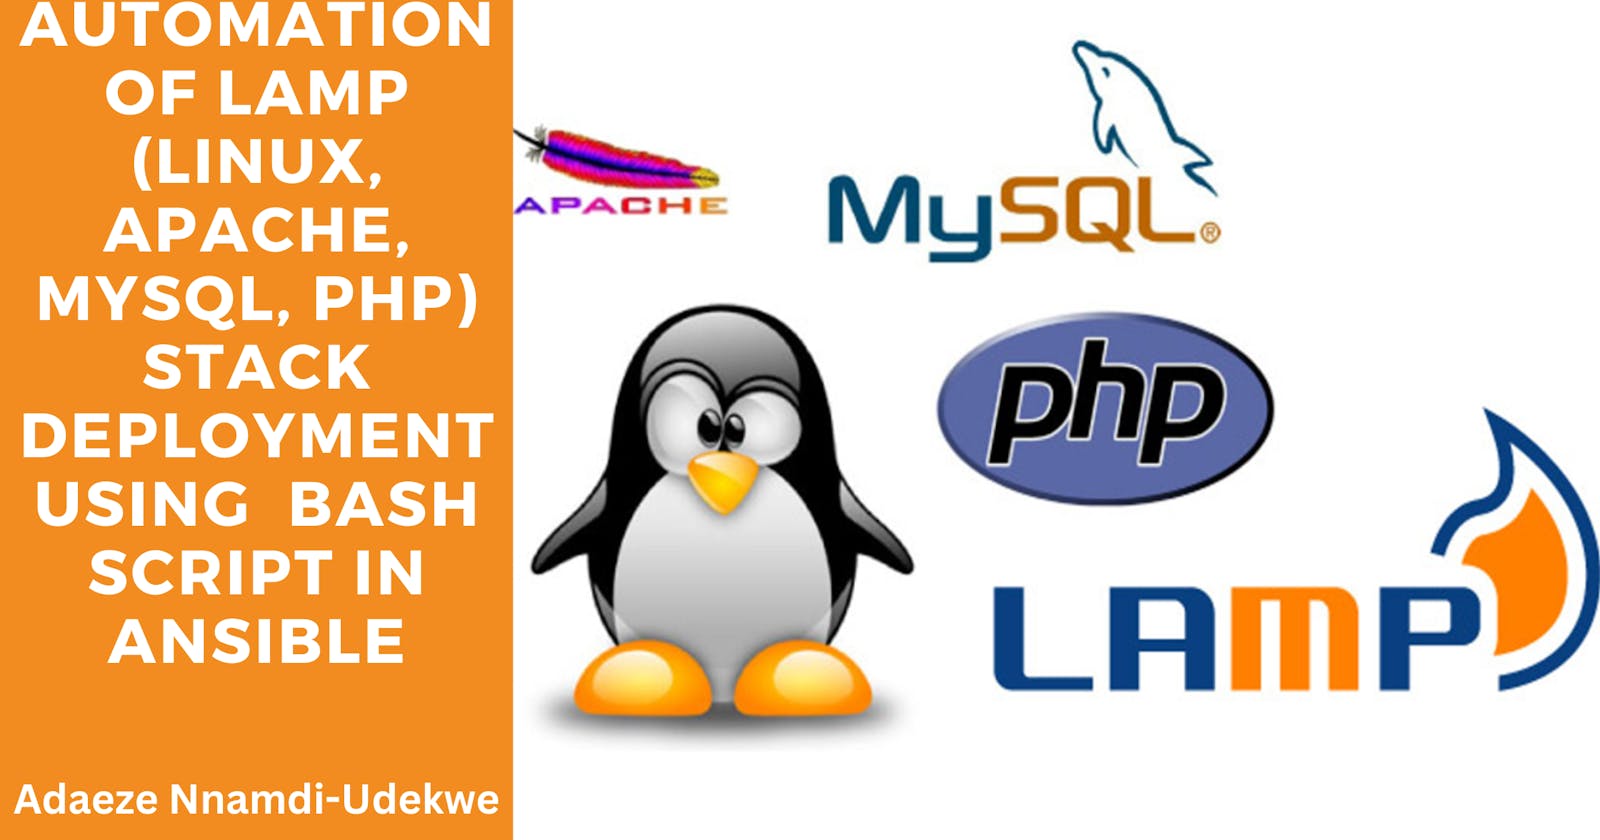 Automation of LAMP (Linux, Apache, MySQL, PHP) stack deployment using Bash Script in Ansible